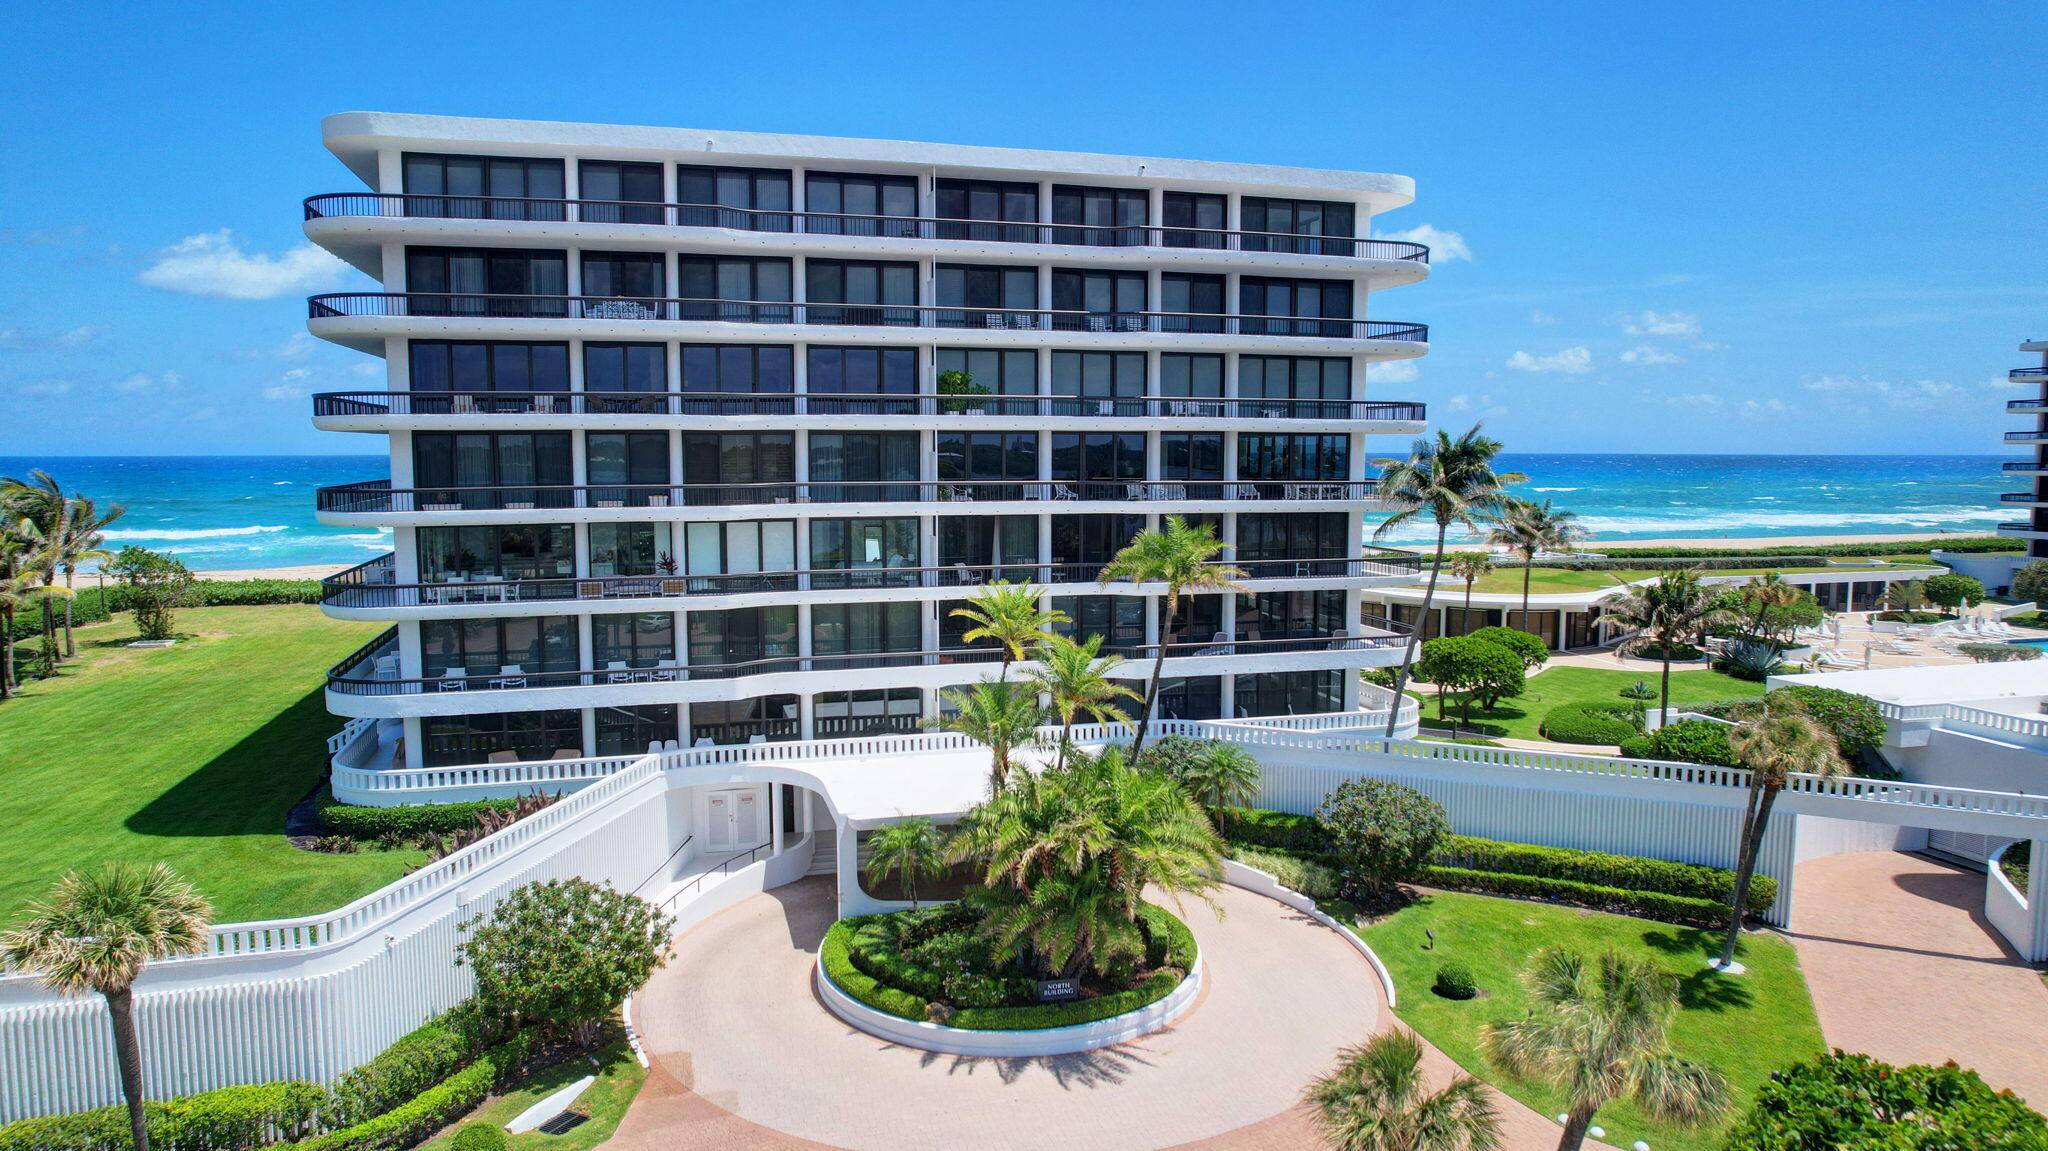 Step into luxury at this exquisite oceanfront rental in Palm Beach.